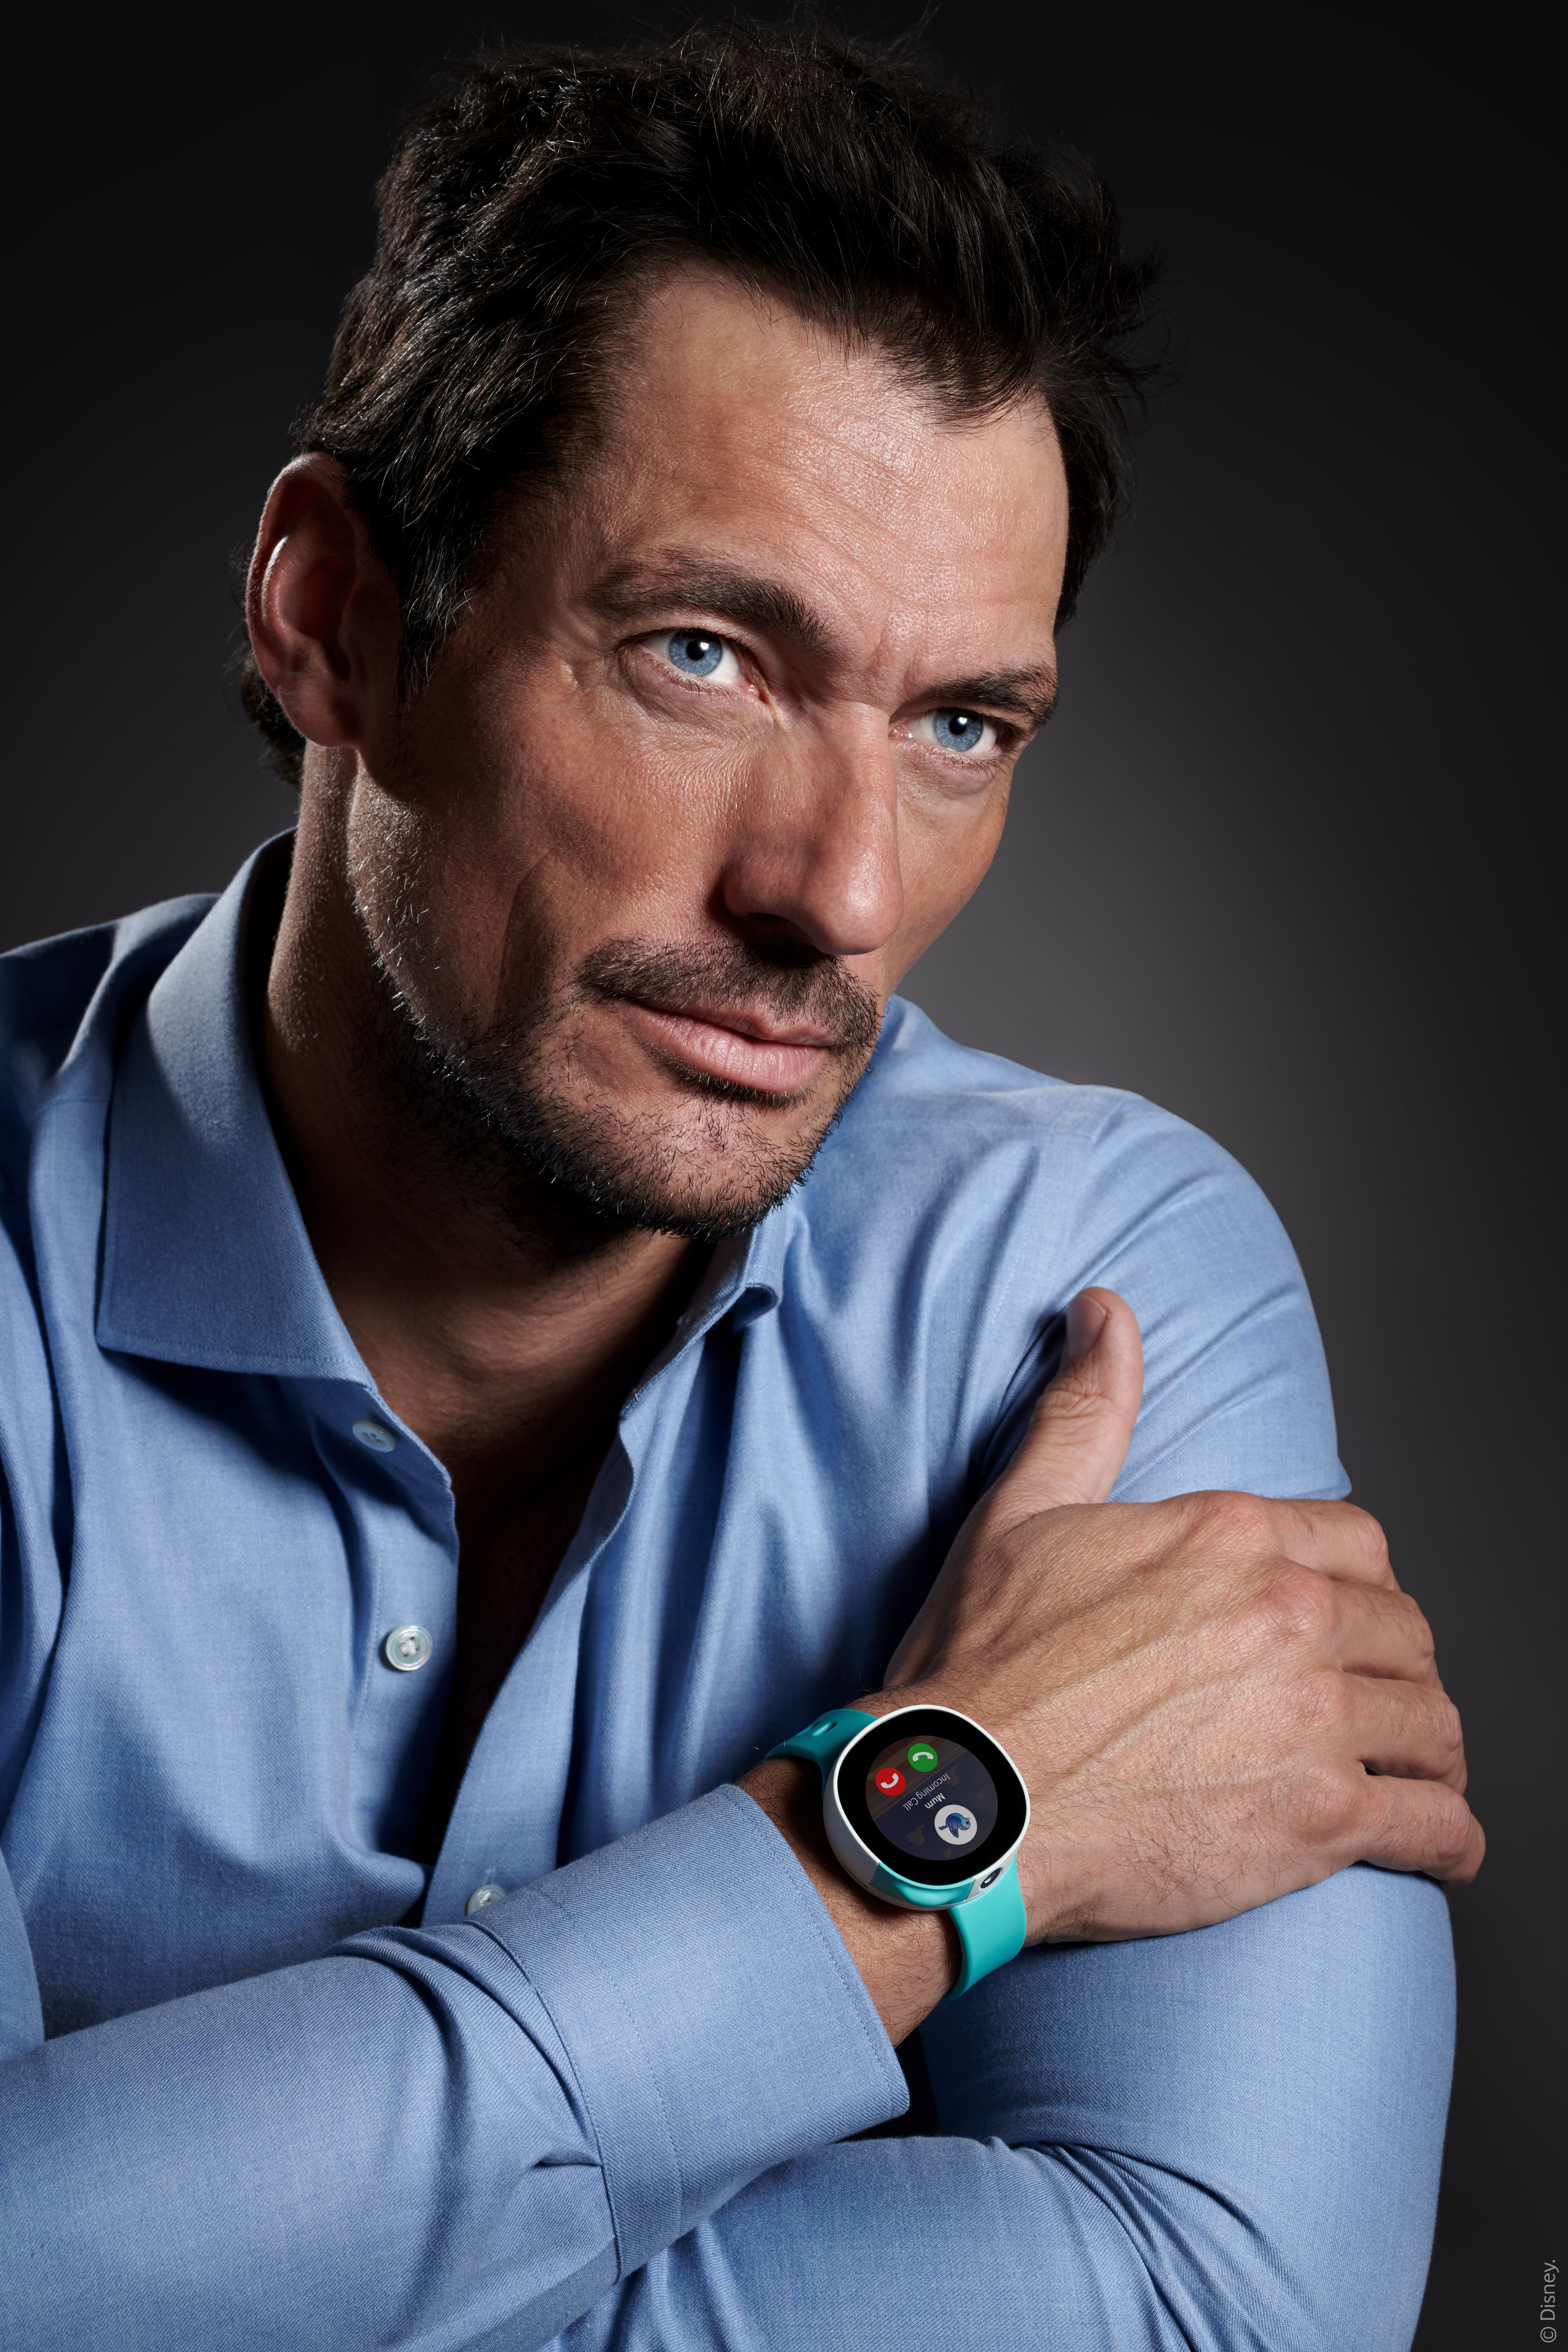 Vodafone teams up with David Gandy for a little different photo shoot